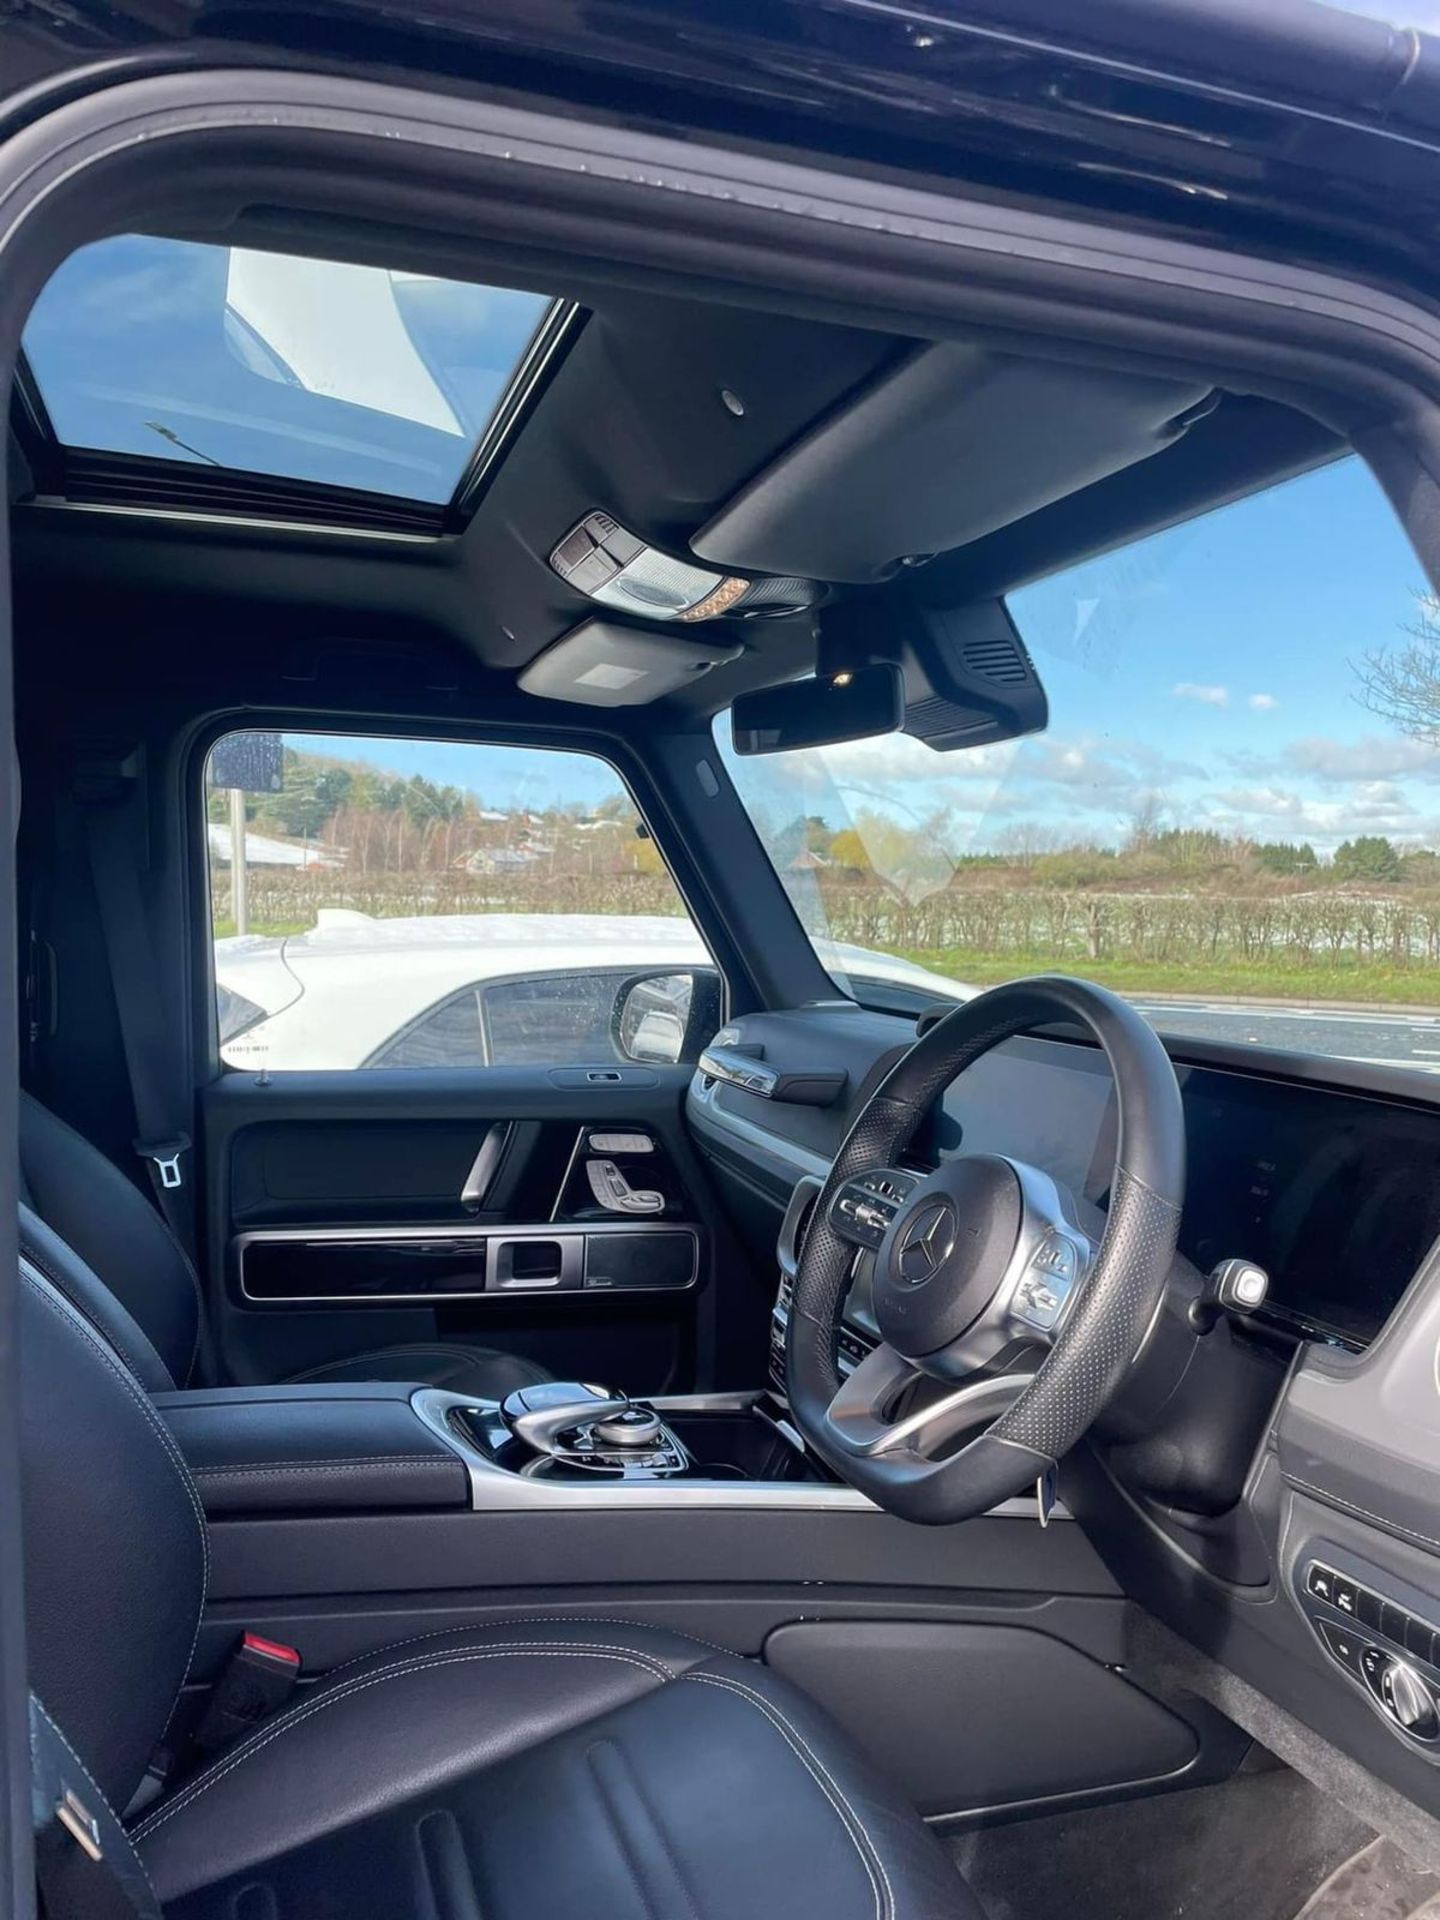 2019/19 REG MERCEDES-BENZ G350 AMG LINE PREMIUM D 4M AUTOMATIC RARE 7 SEAT, SHOWING 0 FORMER KEEPERS - Image 8 of 9